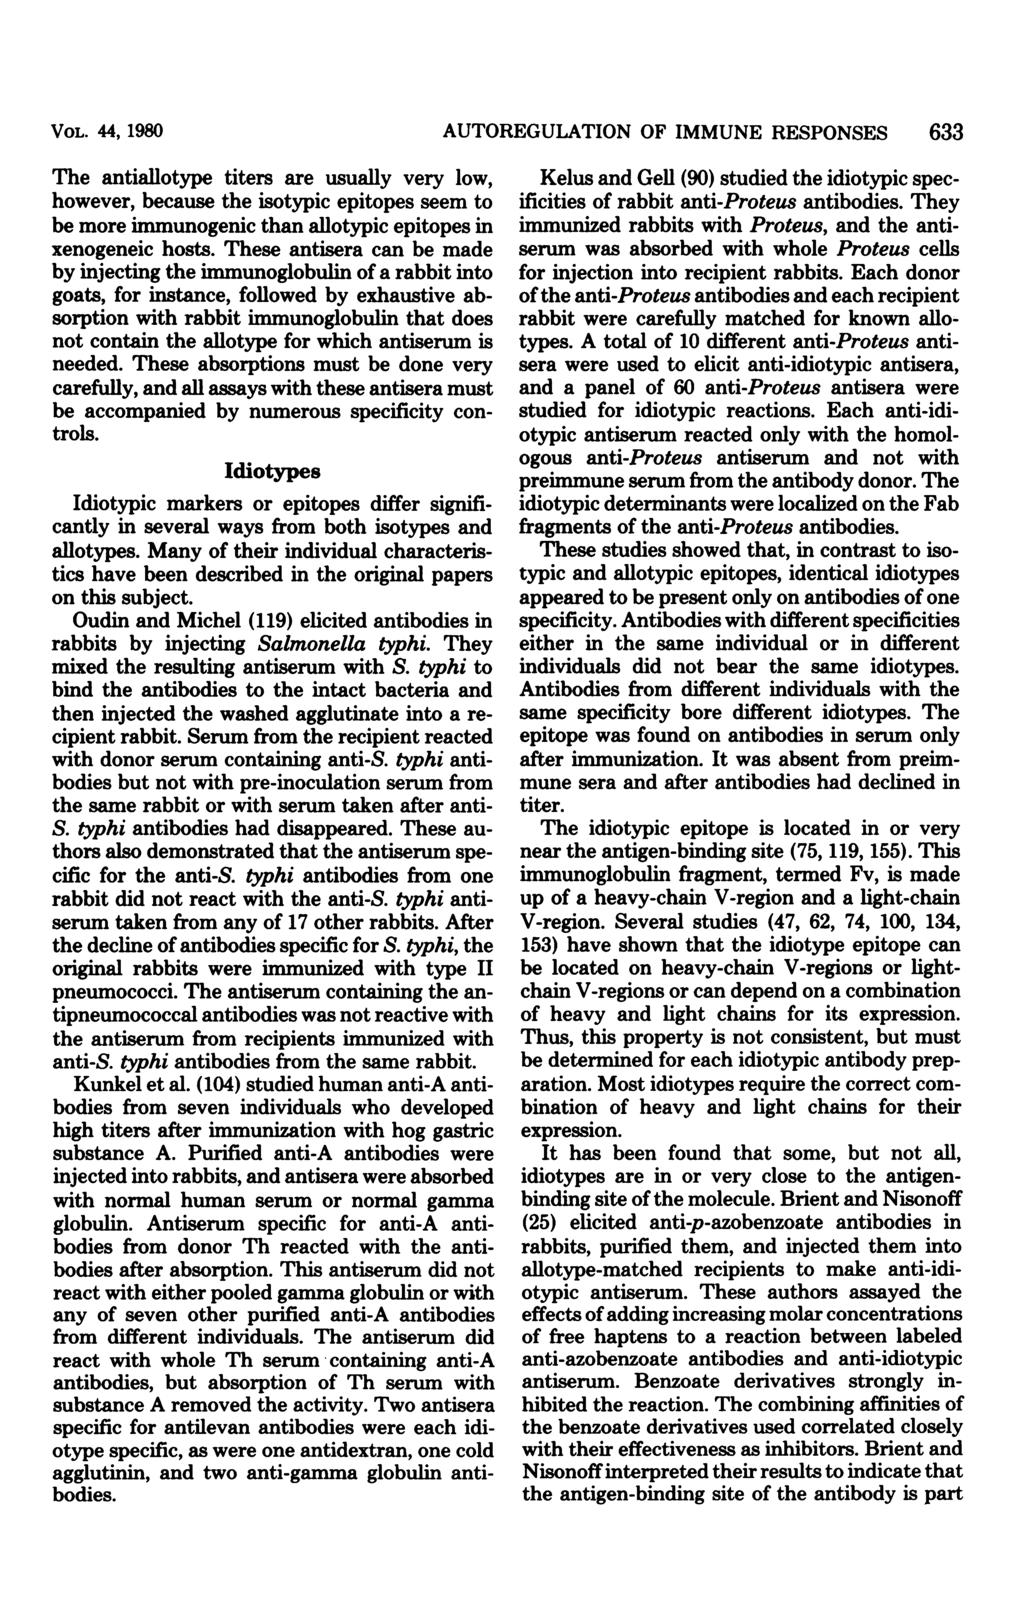 VOL. 44, 1980 The antiallotype titers are usually very low, however, because the isotypic epitopes seem to be more immunogenic than allotypic epitopes in xenogeneic hosts.